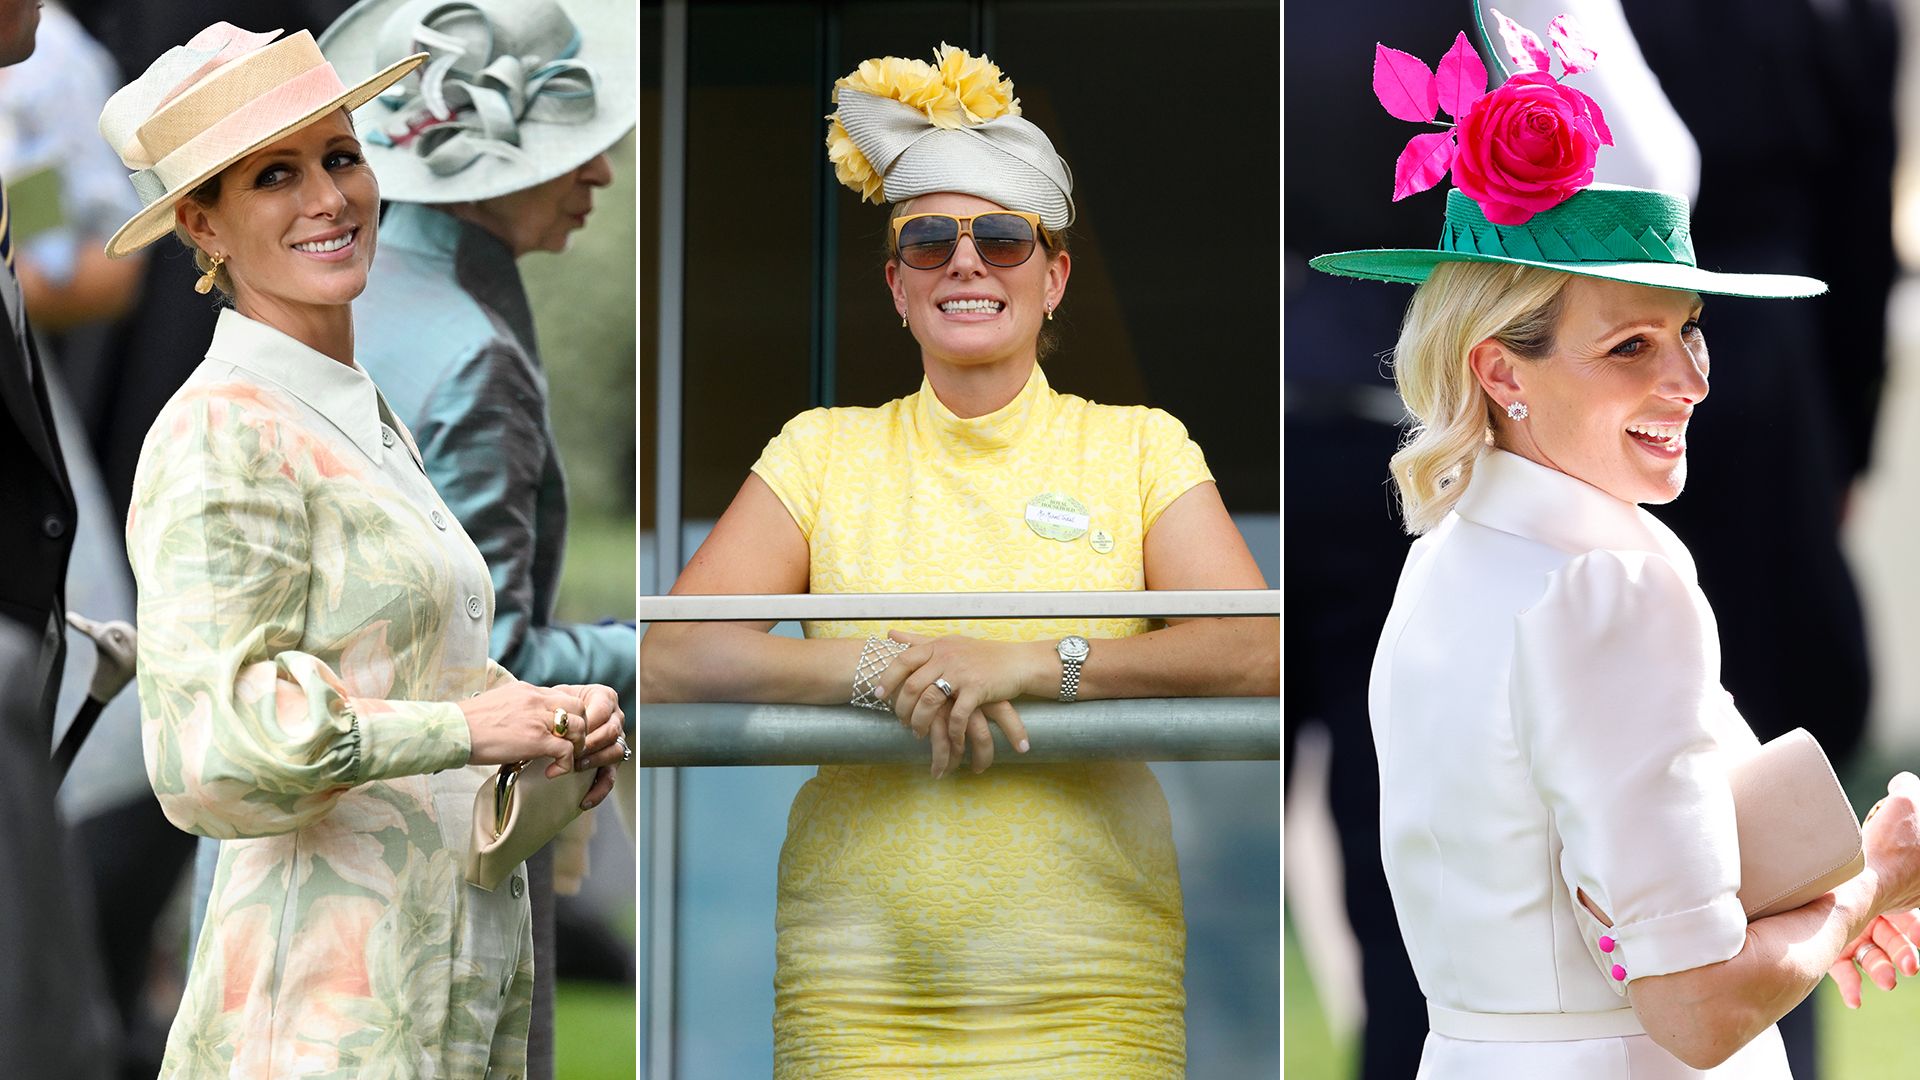 zara Tindall best outfits